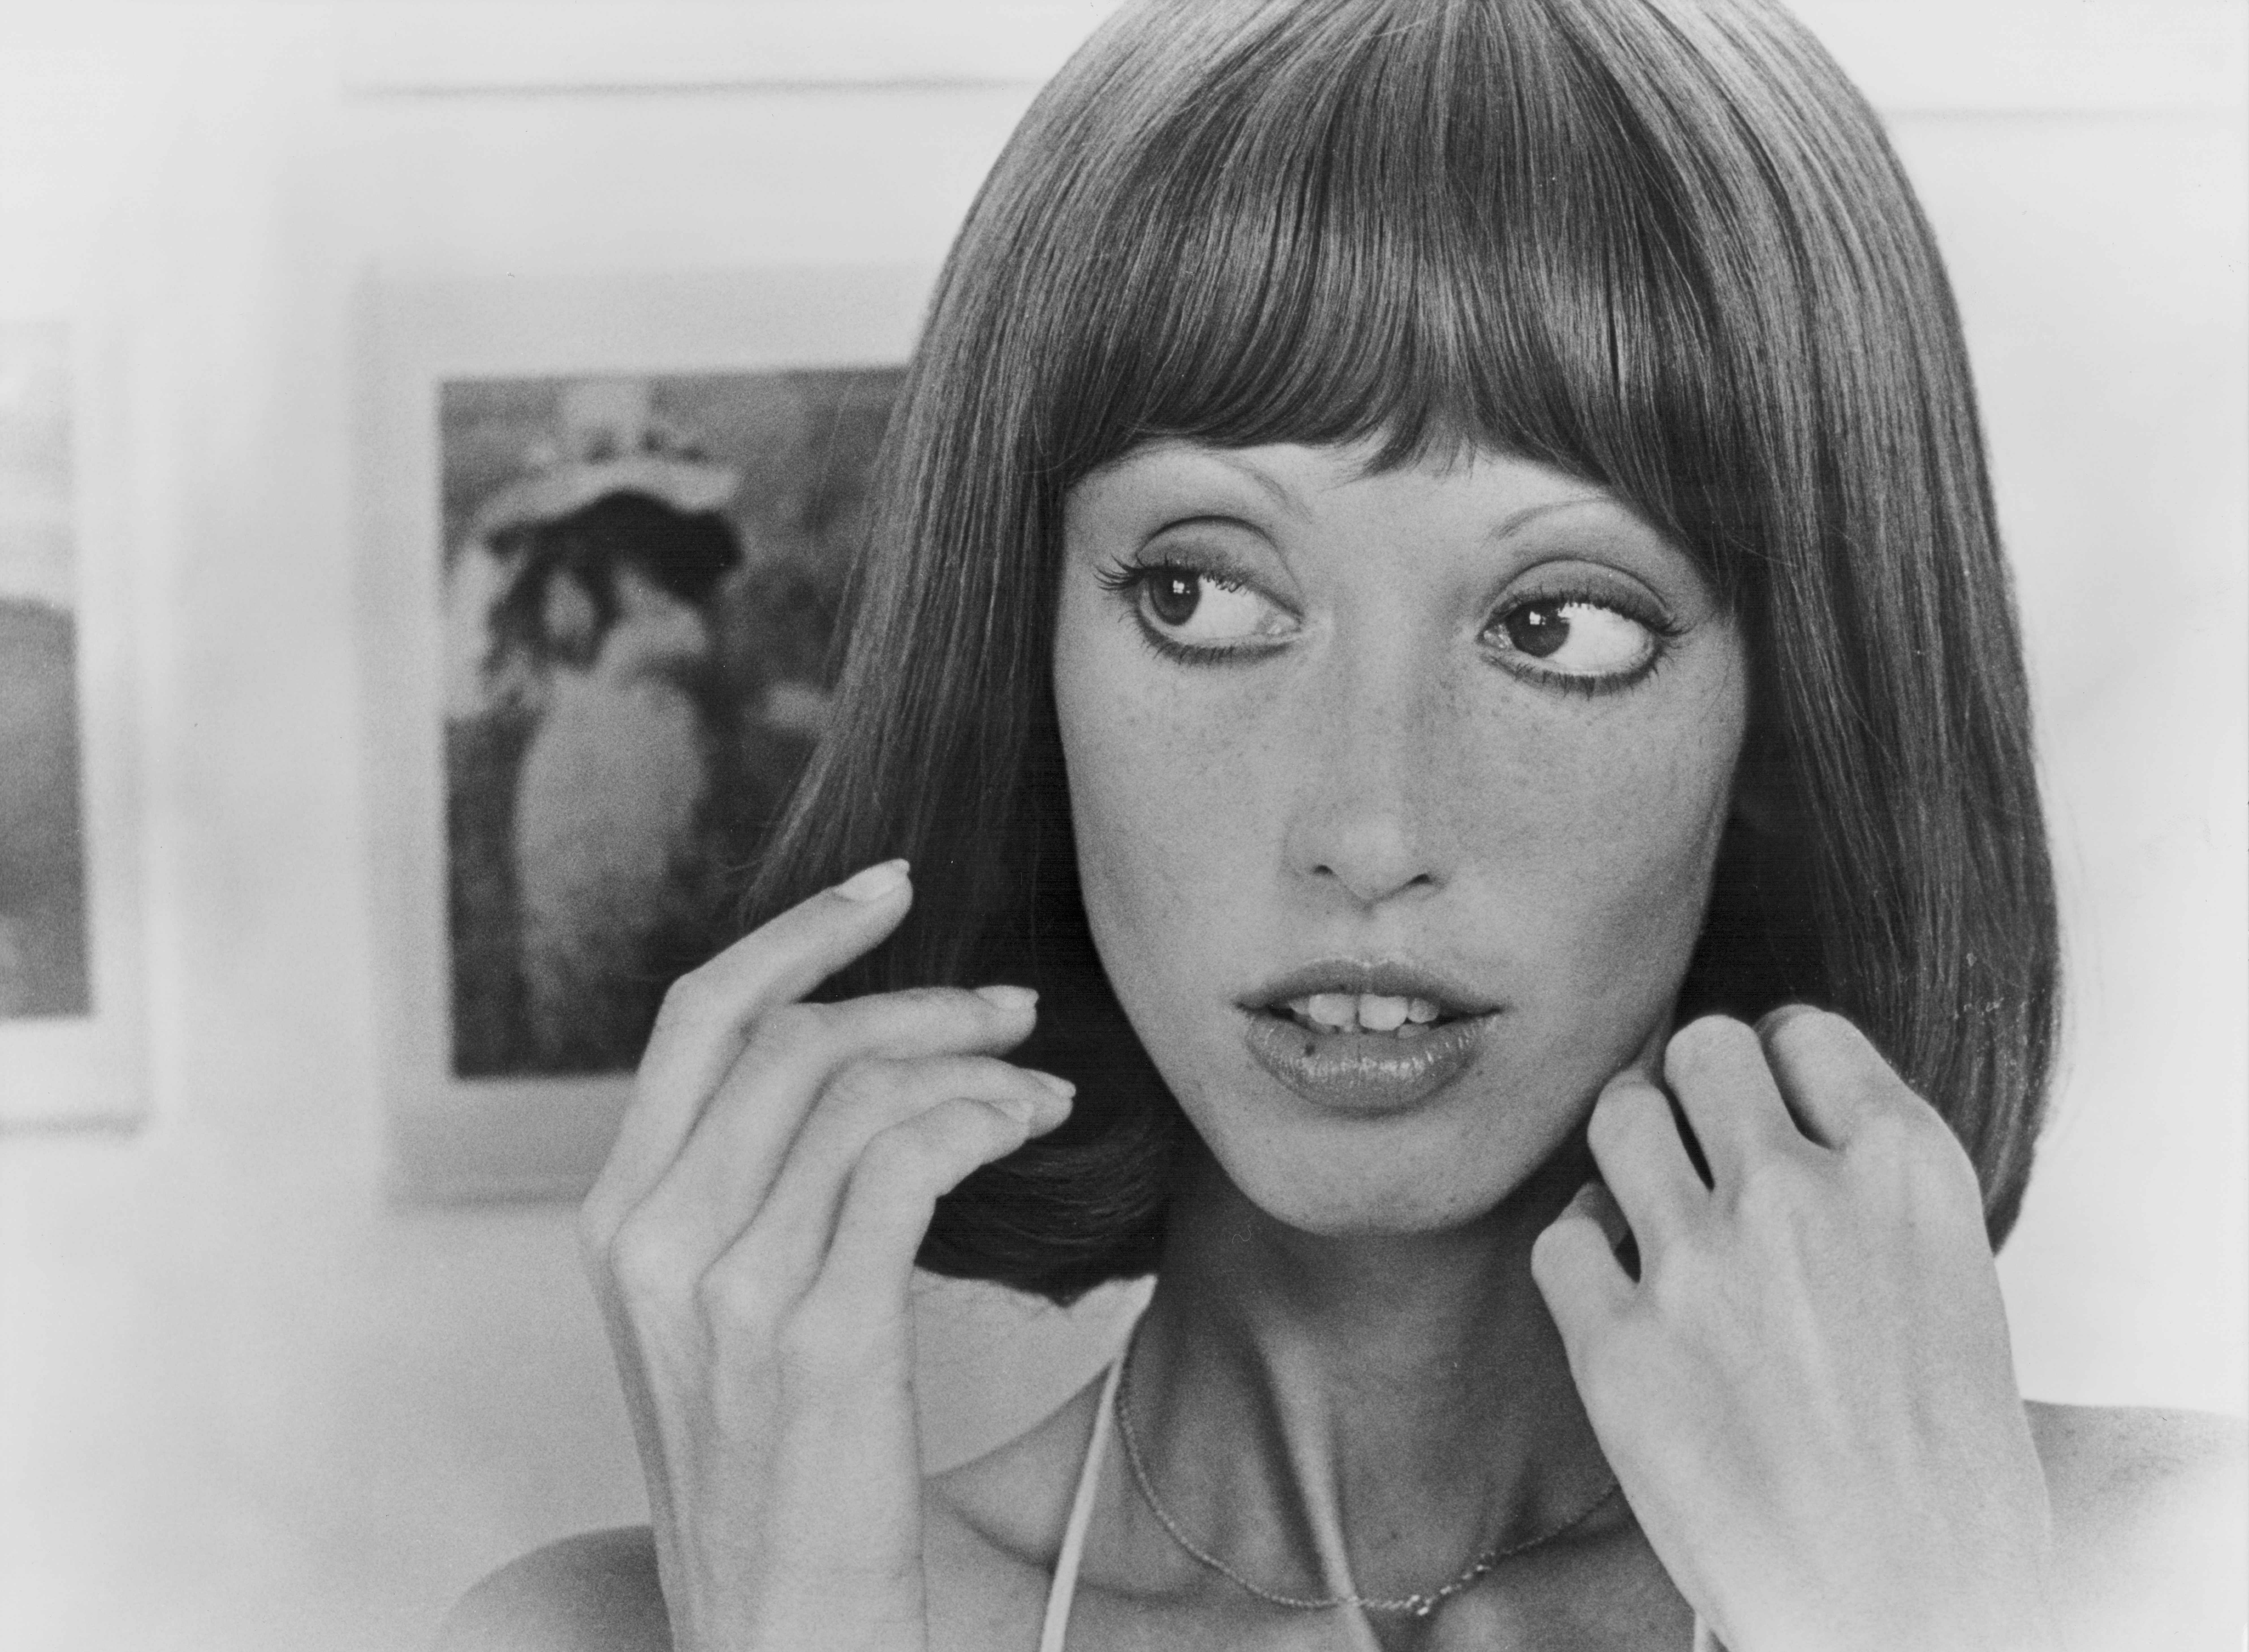 Shelley Duvall in a scene from the movie "3 Women" in 1977 | Source: Getty Images